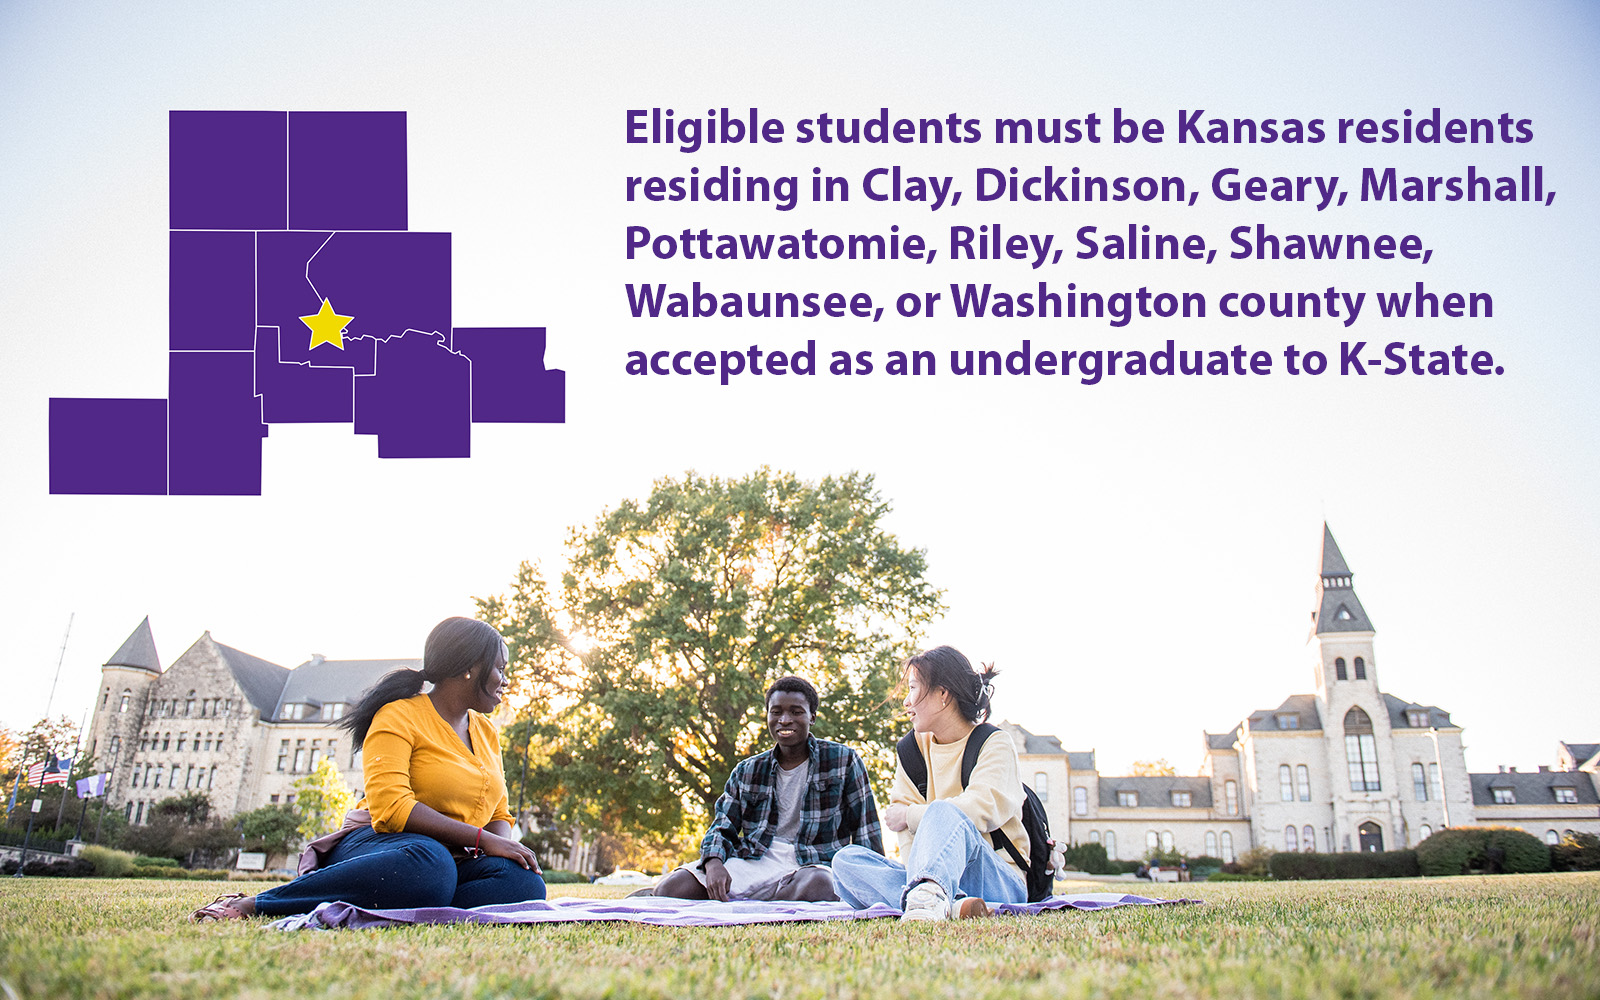 "Eligible students must be Kansas residents residing in Clay, Dickinson, Geary, Marshall, Pottawatomie, Riley, Saline, Shawnee, Wabaunsee, or Washington county when accepted as an undergraduate to K-State" The image shows three student sitting on the lawn in front of Anderson. A purple graphic of the aforementioned counties is colored in purple.